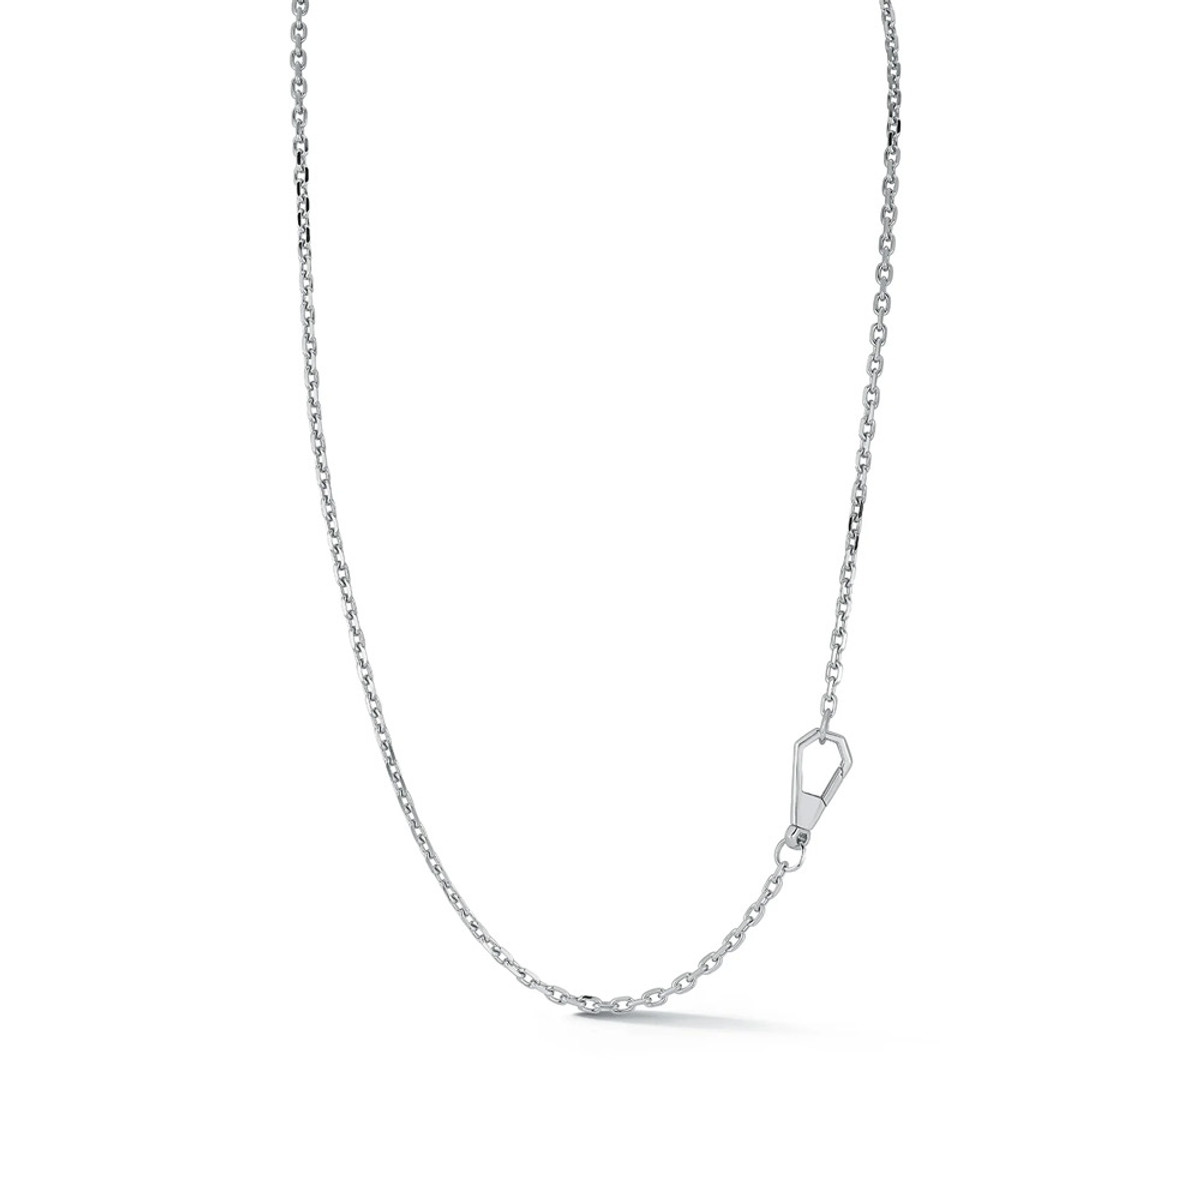 Walters Faith Carrington Sterling Silver Cable Chain Necklace with Swivel Clasp-56421